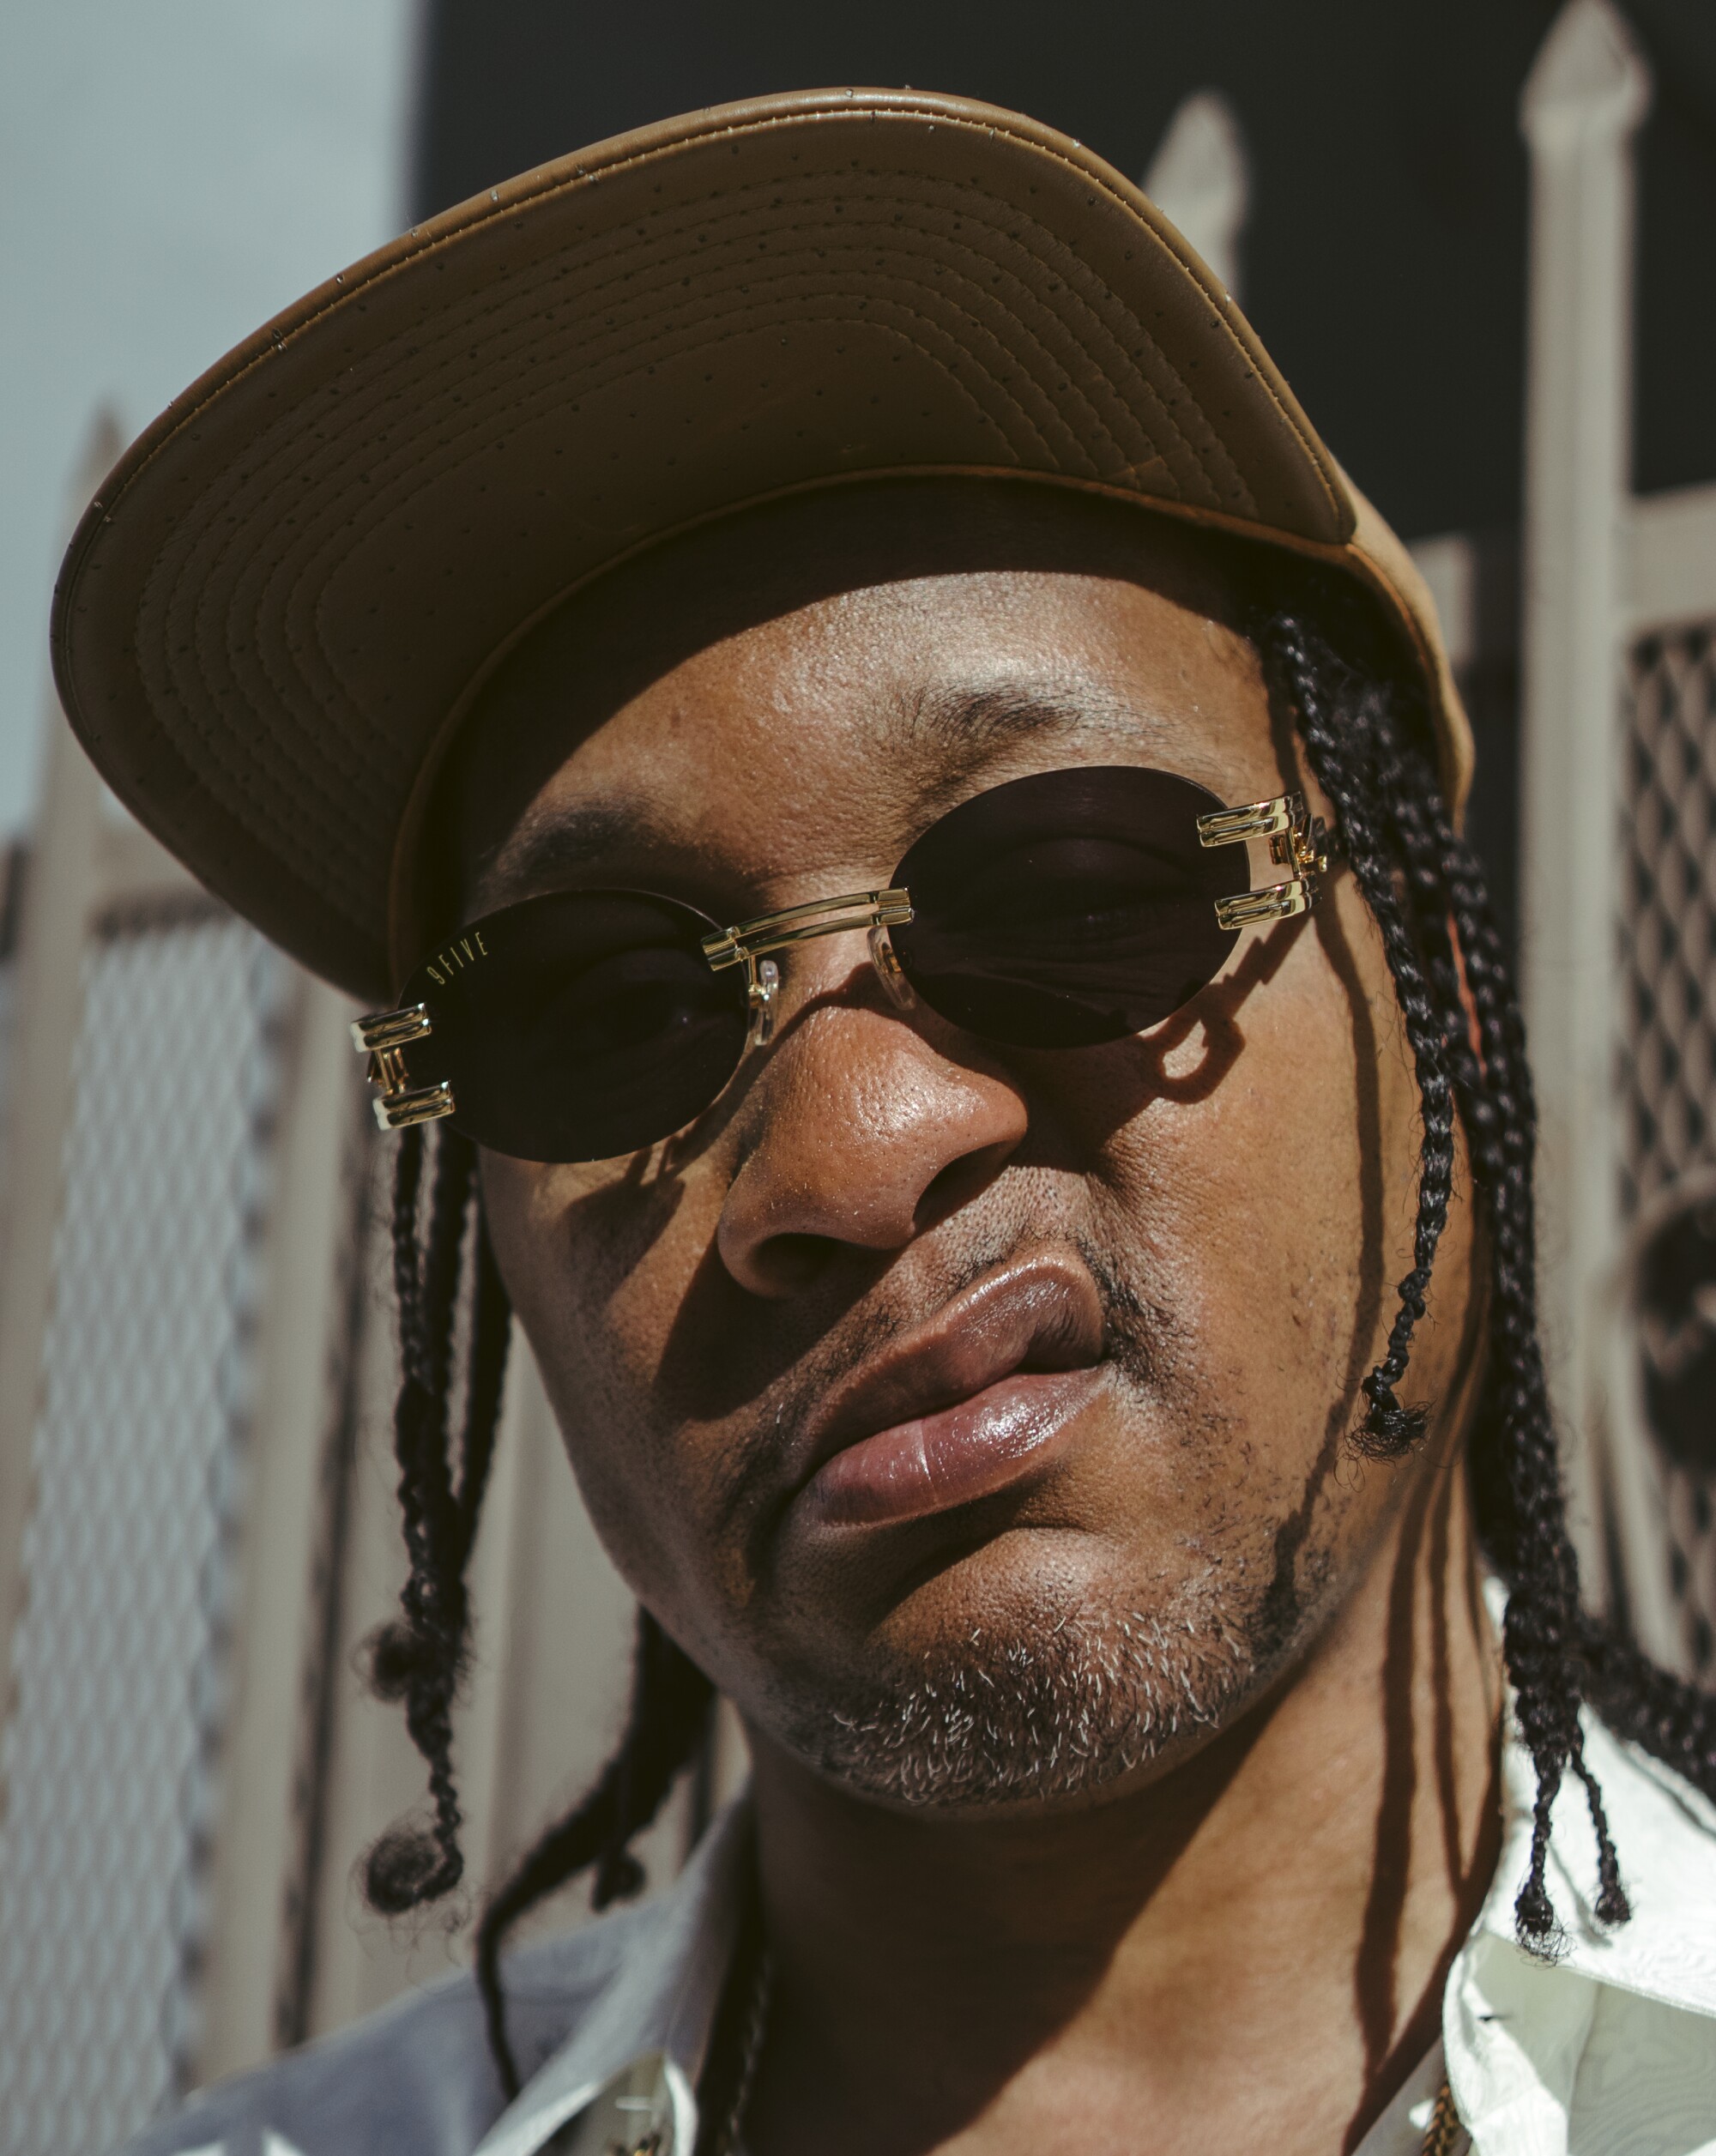 DJ Quik, wearing a hat and sunglasses, makes a face for the camera.